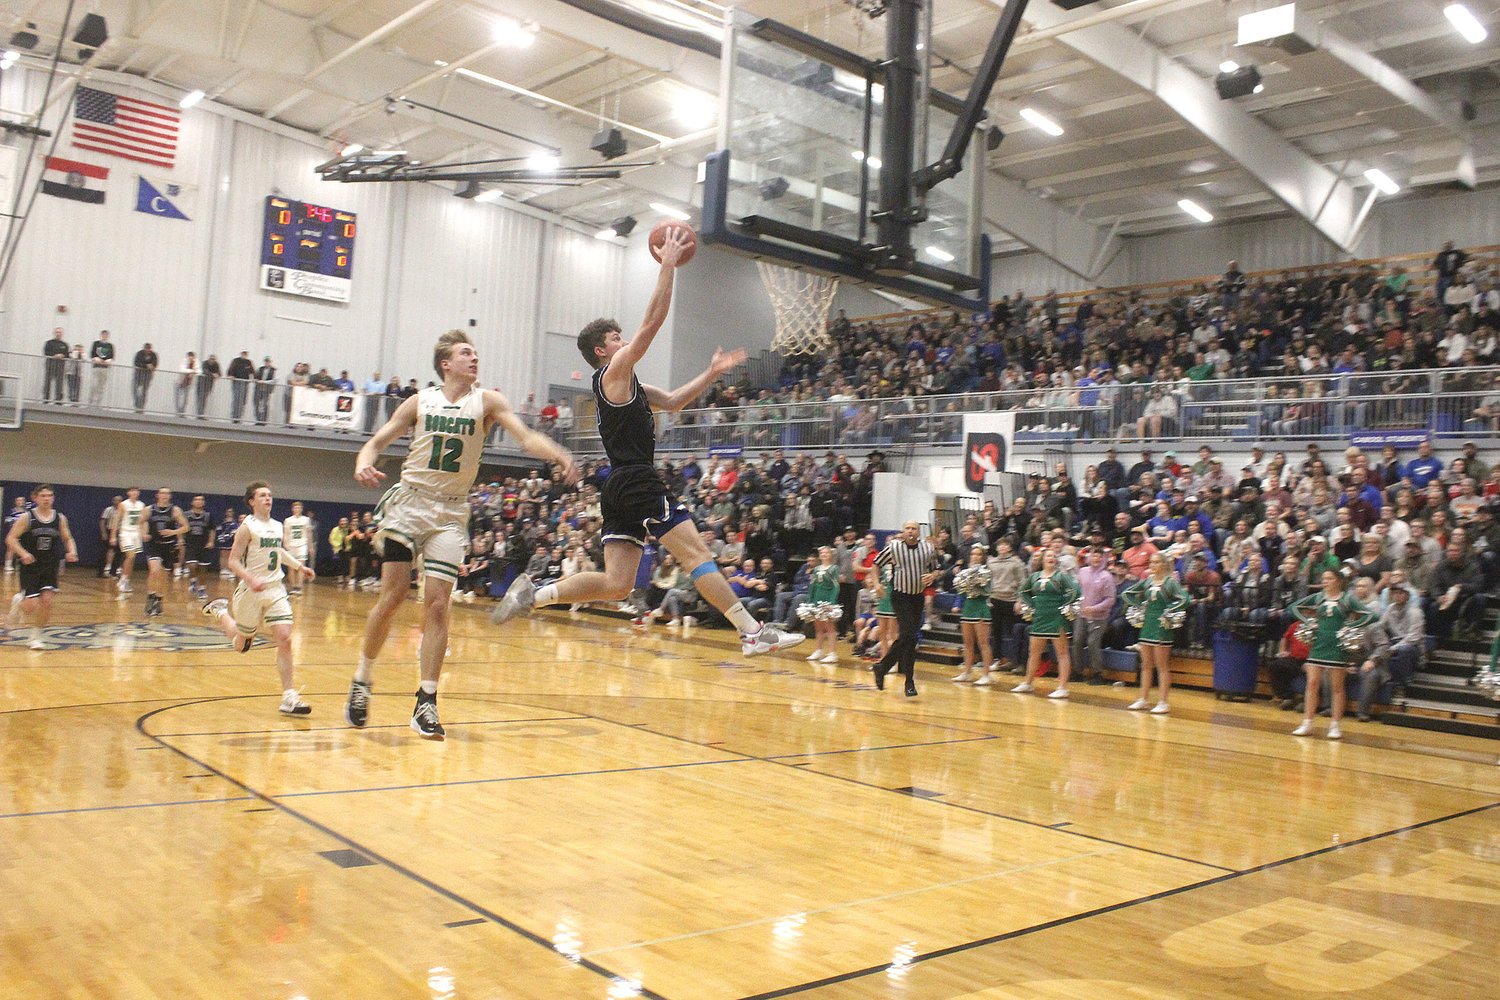 Norwood’s Garrett Davault glides through the air for a layup after getting an early steal to give the Pirates their first points of the game in the Cabool Holiday Tournament championship finals against undefeated Thayer.